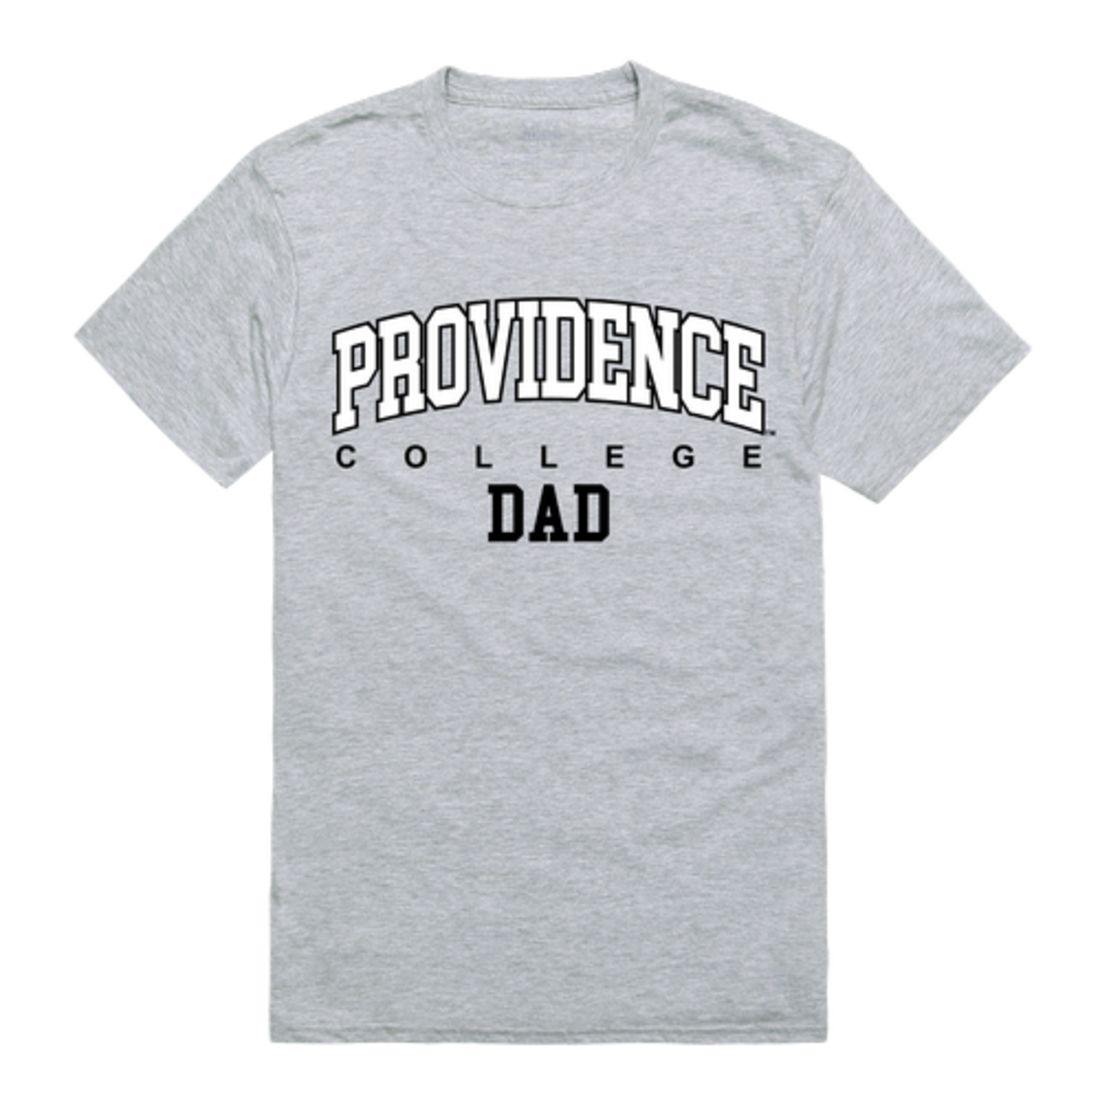 Providence College Friars College Dad T-Shirt-Campus-Wardrobe